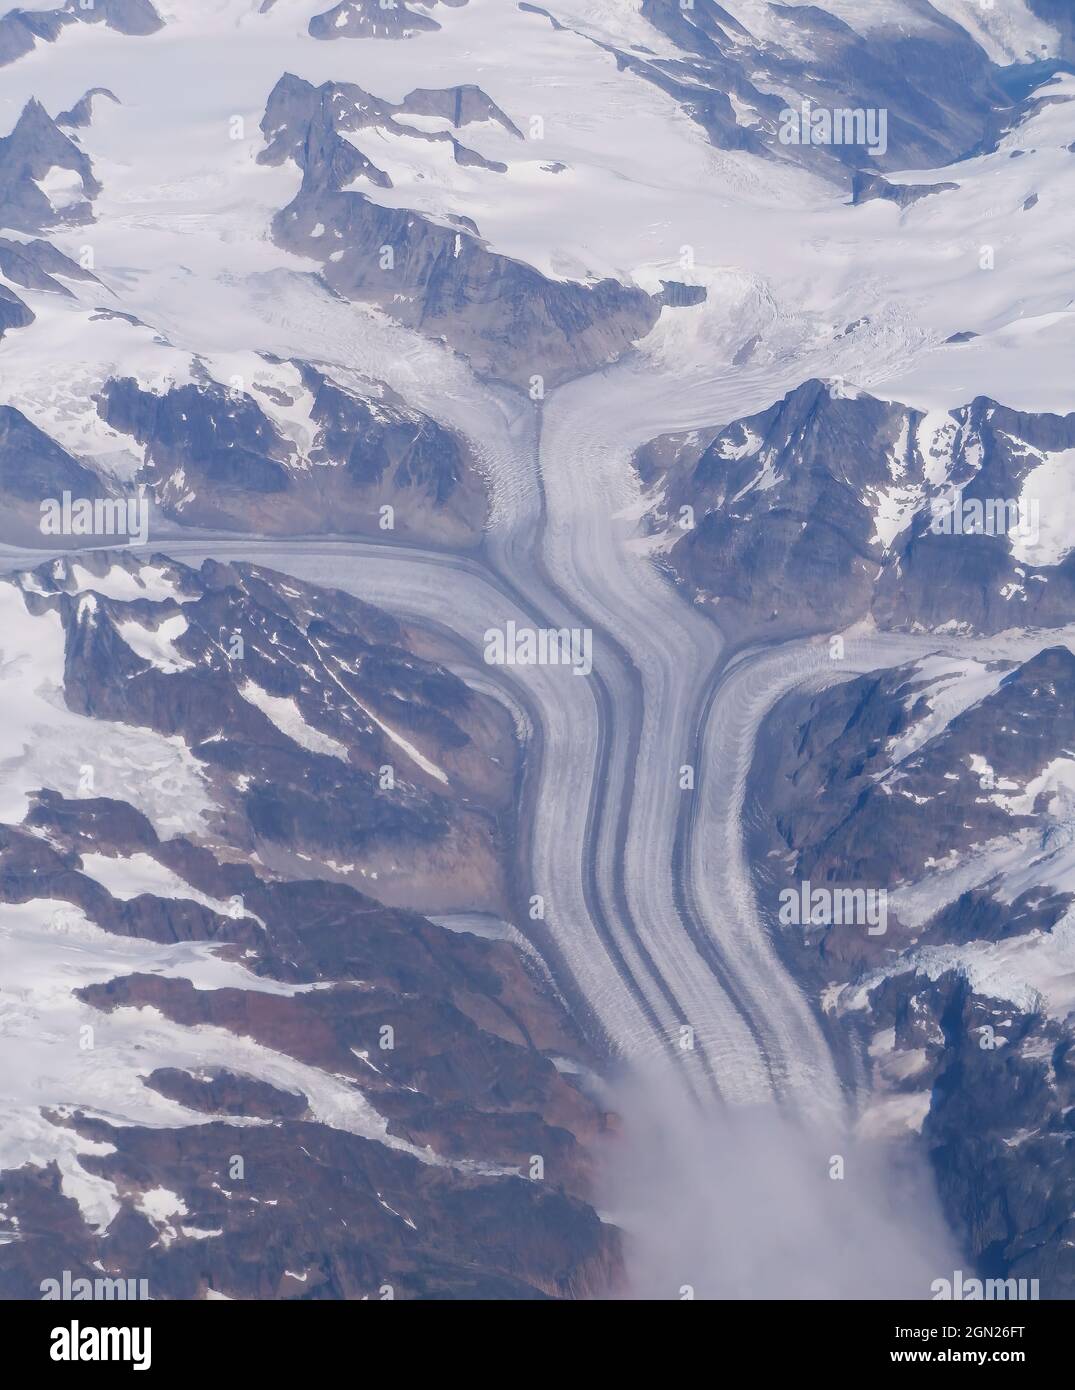 4 glaciers flowing together as seen from the air, Greenland Stock Photo